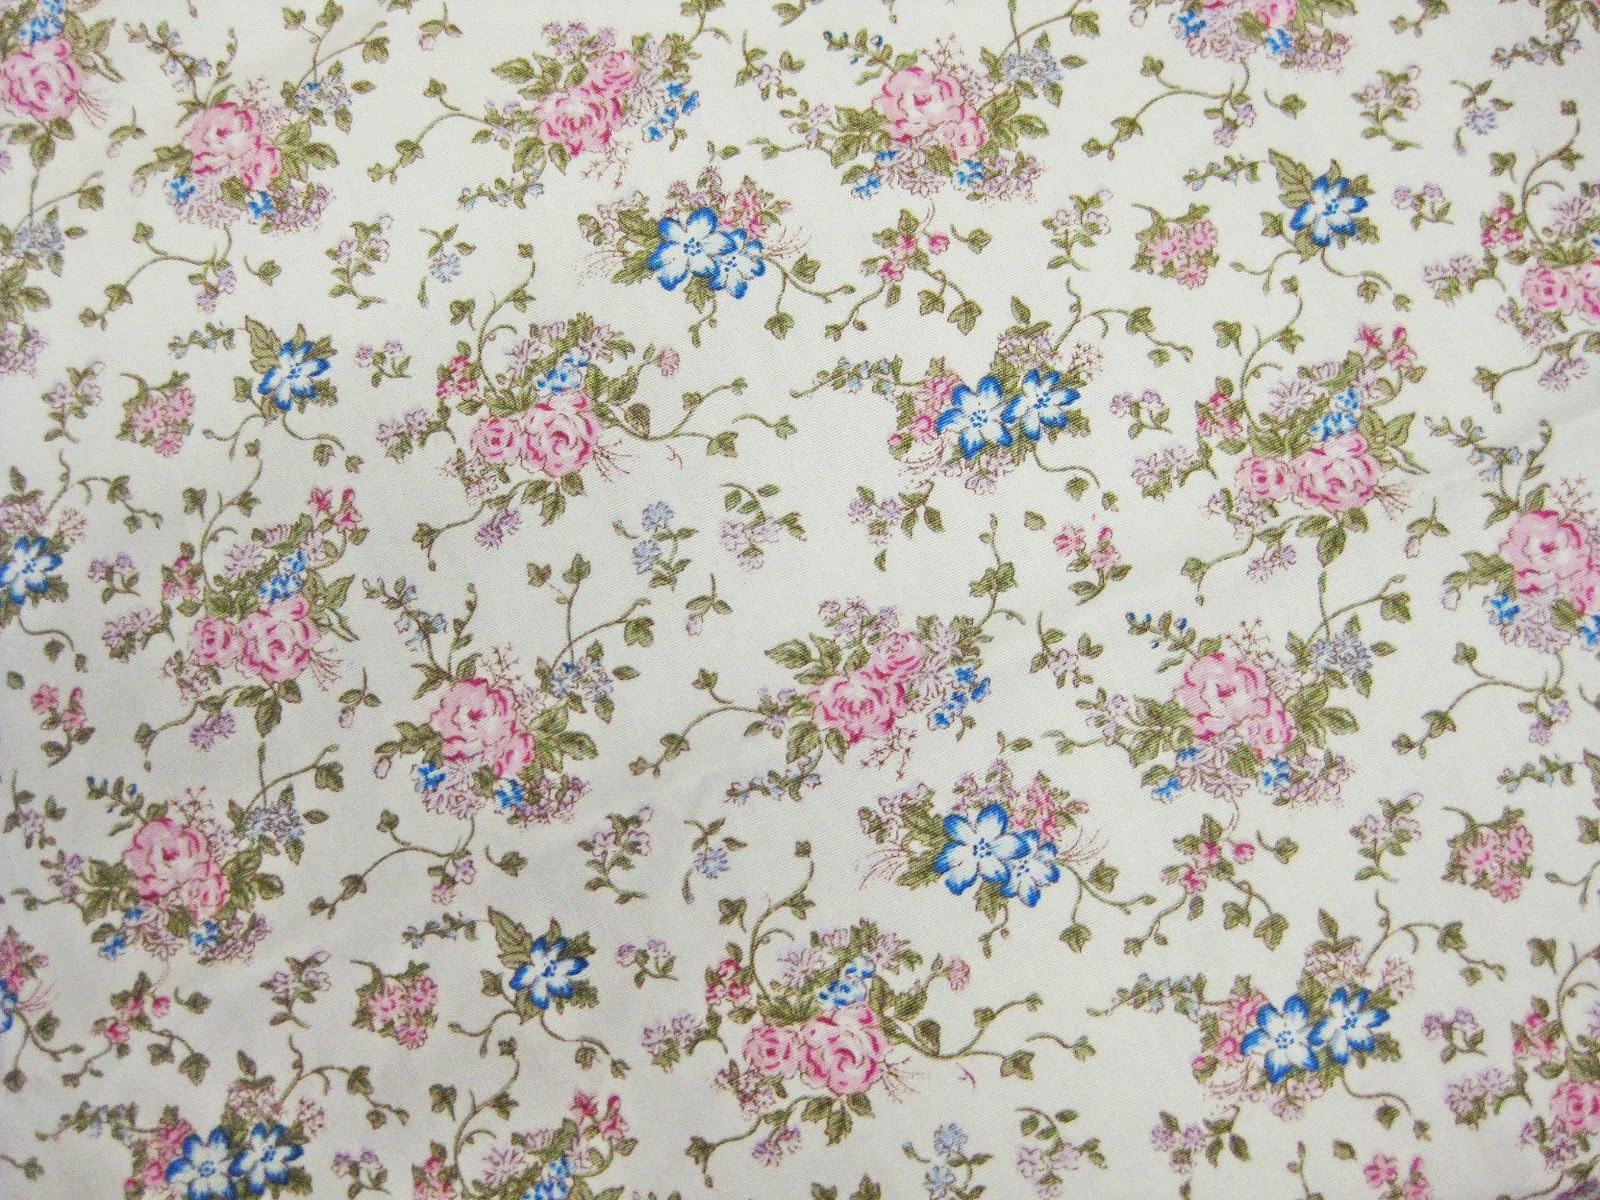 Floral print which according to my friend seems Laura Ashley